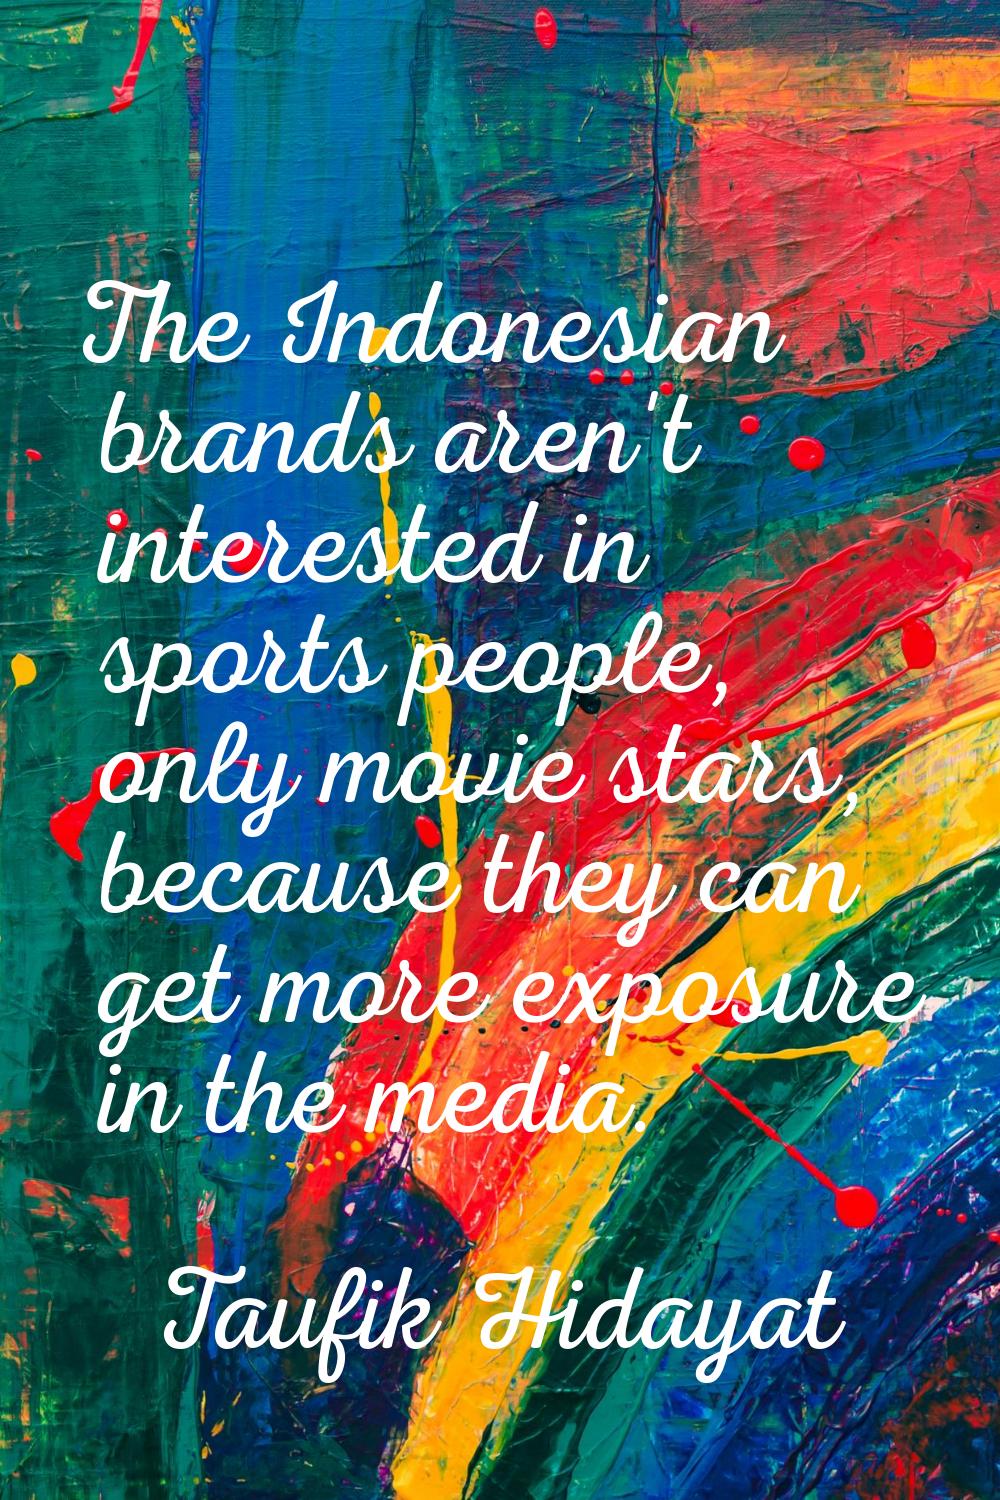 The Indonesian brands aren't interested in sports people, only movie stars, because they can get mo